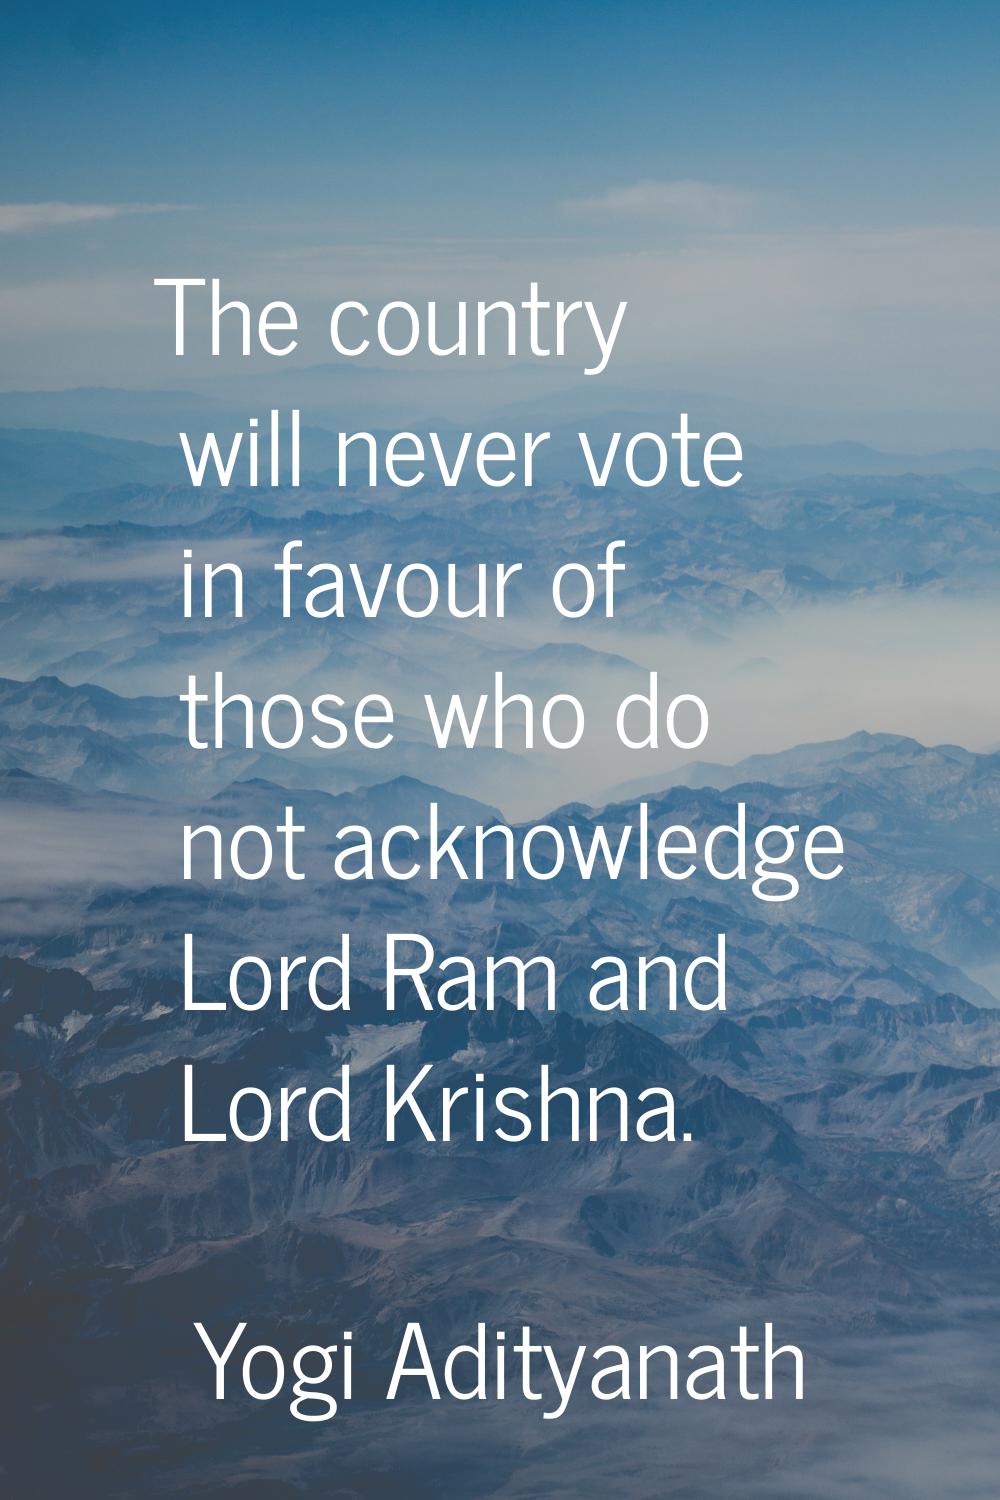 The country will never vote in favour of those who do not acknowledge Lord Ram and Lord Krishna.